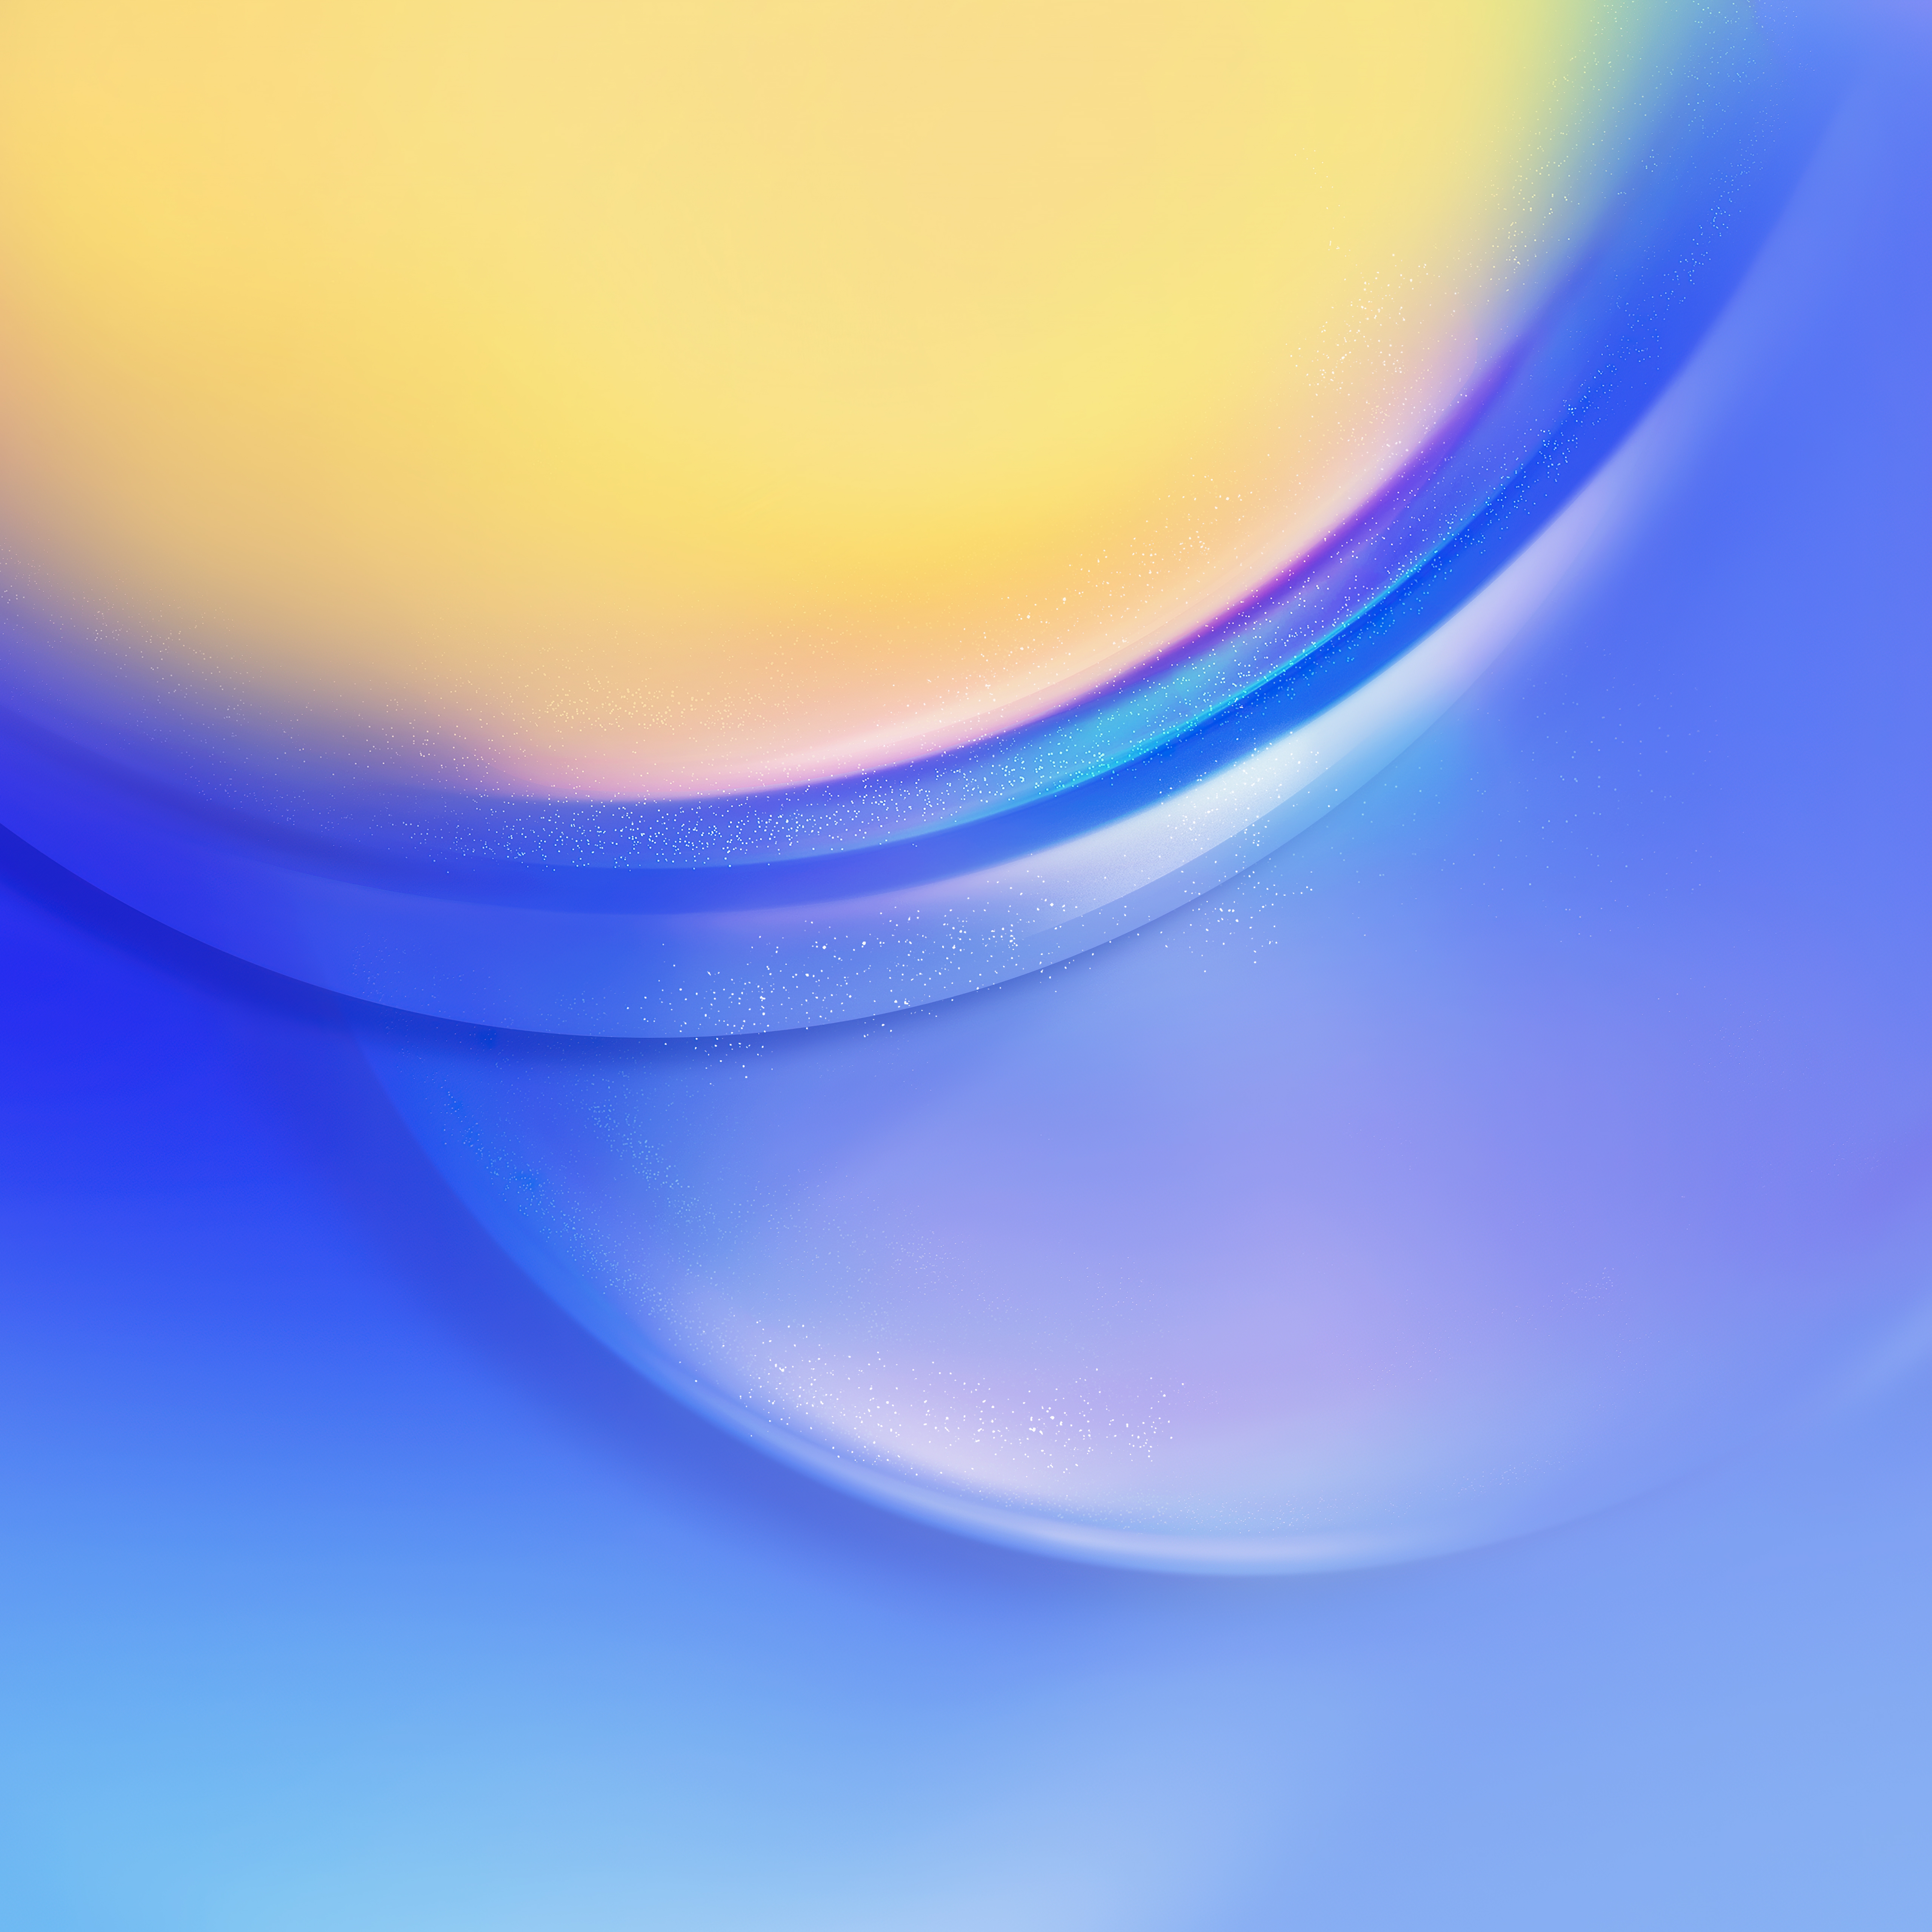 HD wallpaper, Geometric, Samsung Galaxy, 5K, Abstract Background, Concentric Circles